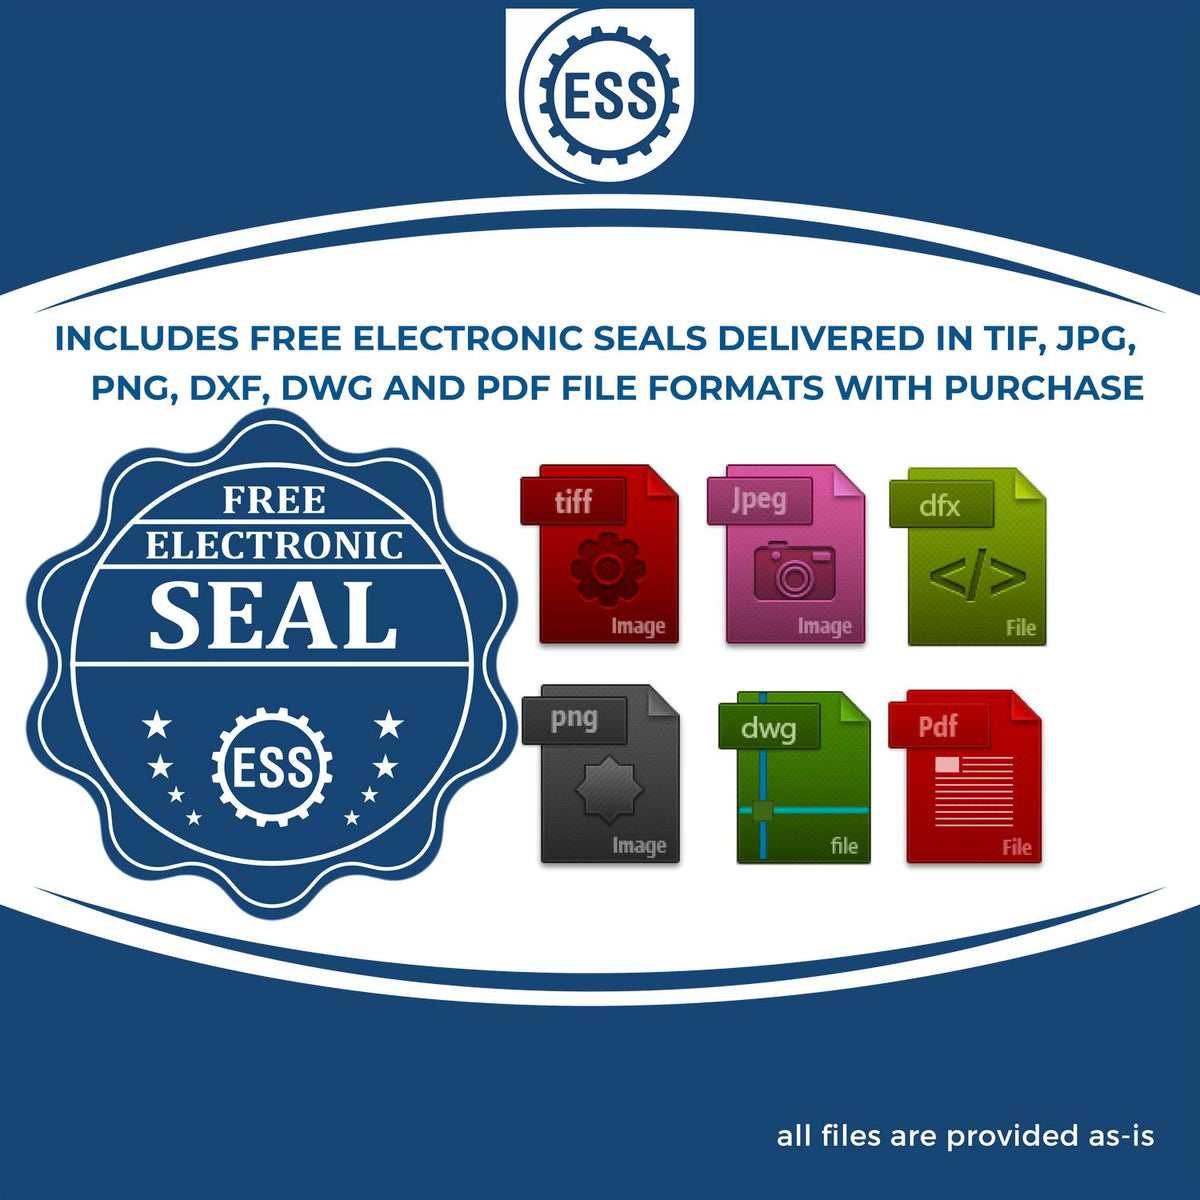 An infographic for the free electronic seal for the Premium MaxLight Pre-Inked Indiana Engineering Stamp illustrating the different file type icons such as DXF, DWG, TIF, JPG and PNG.